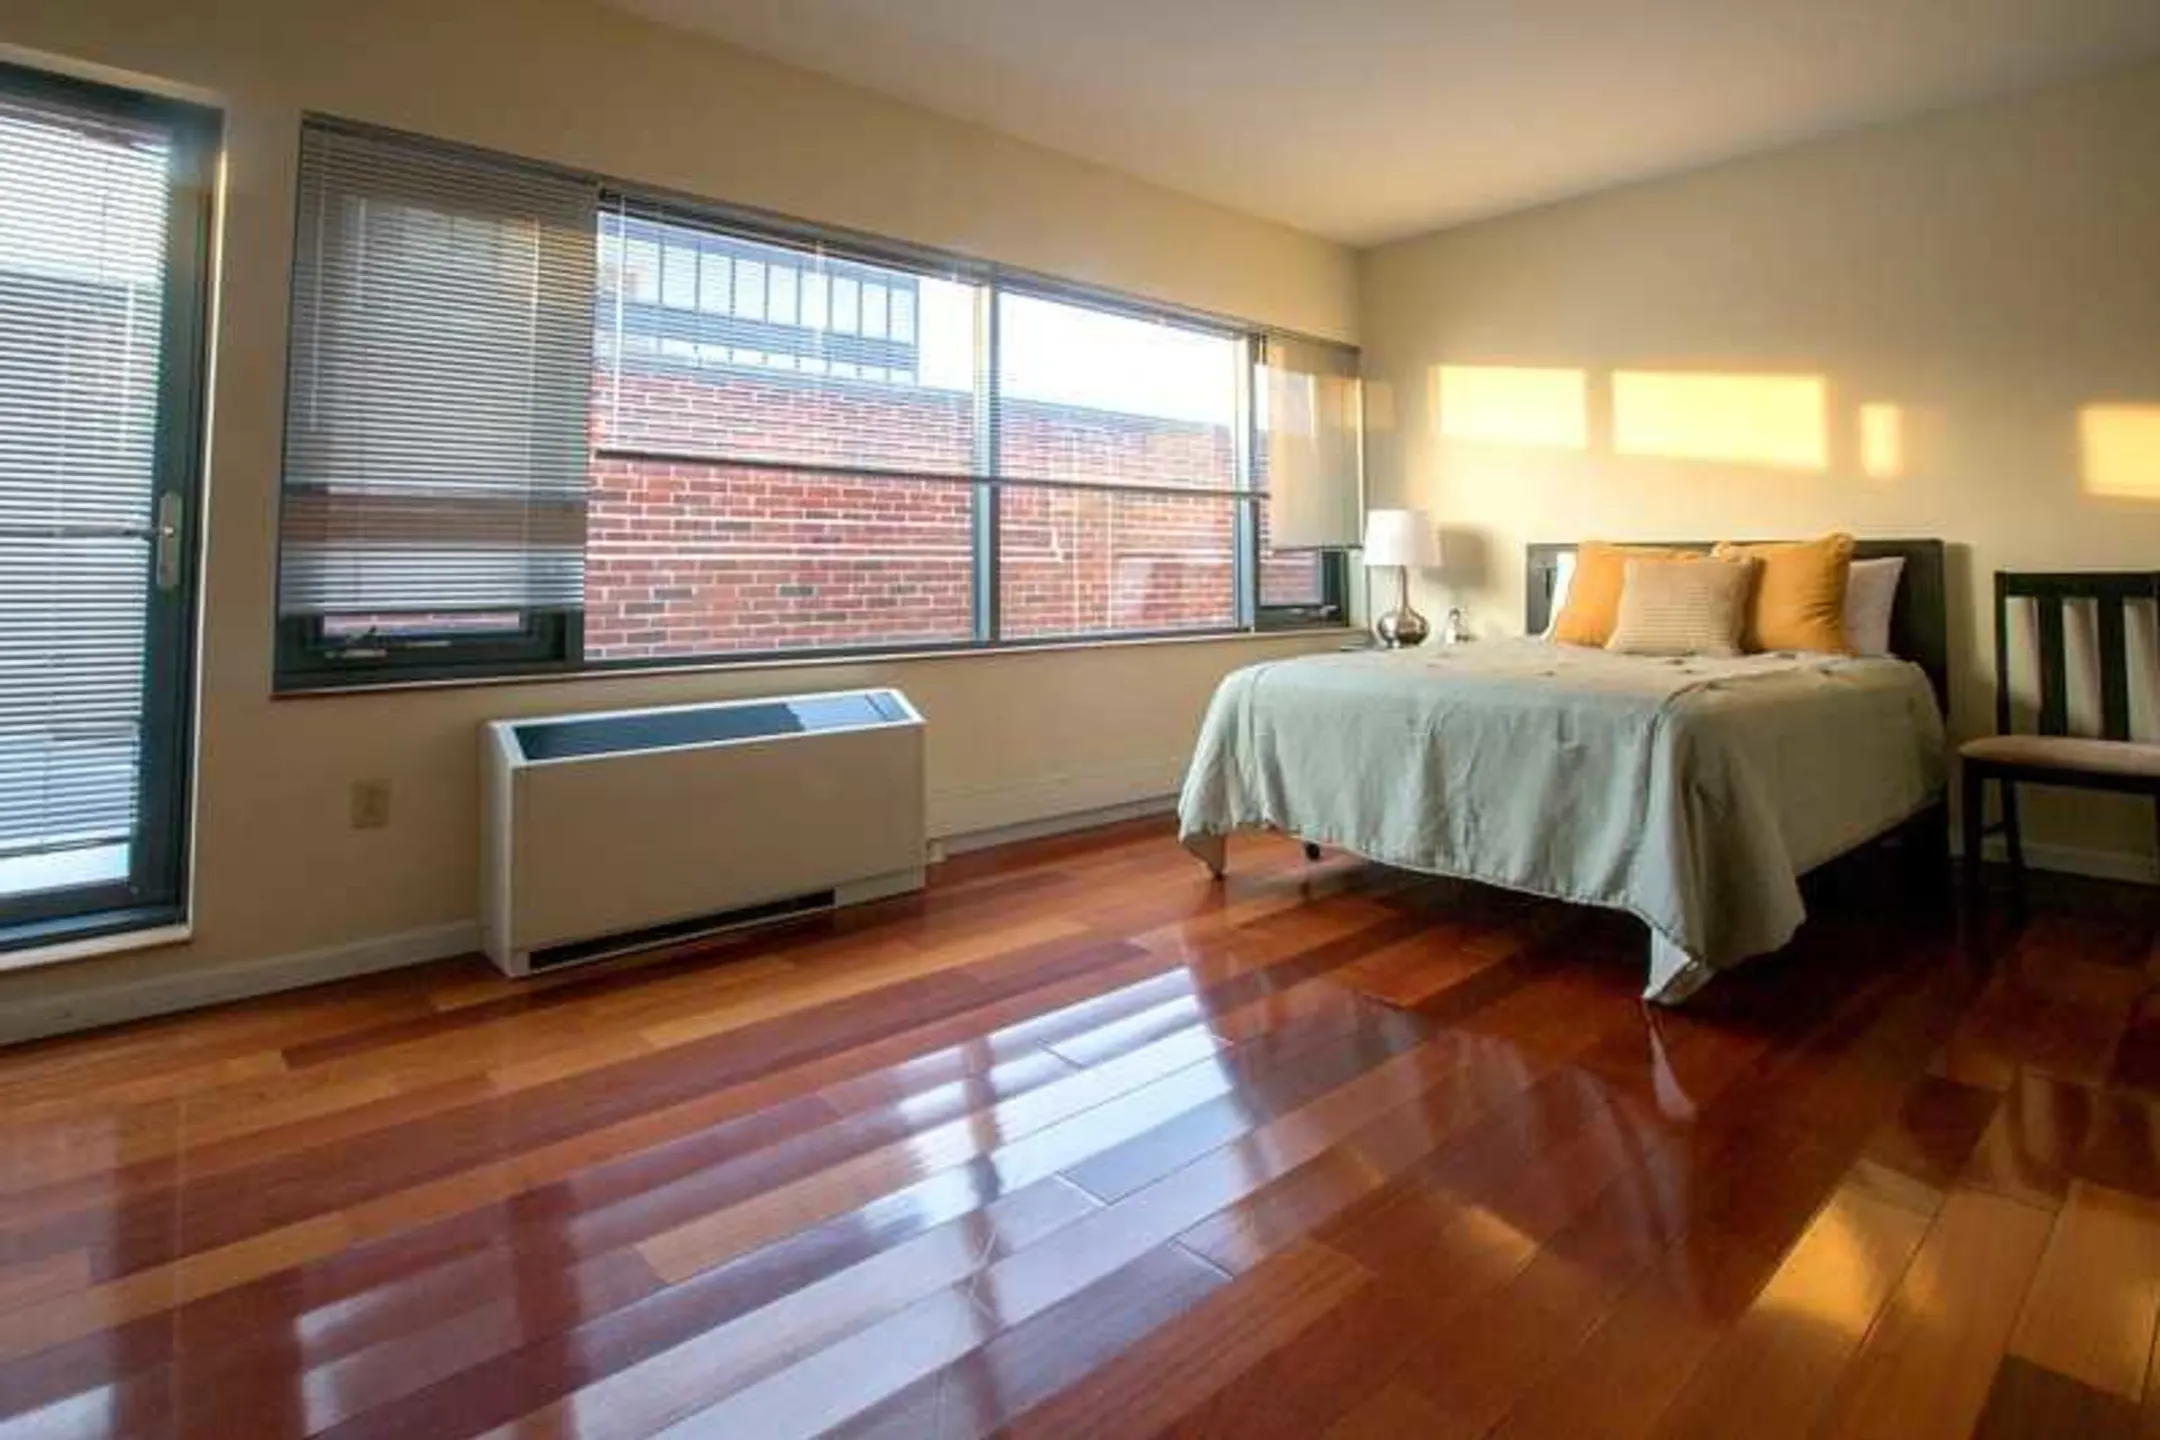 Bedroom - The CenterPointe of New Haven - New Haven, CT